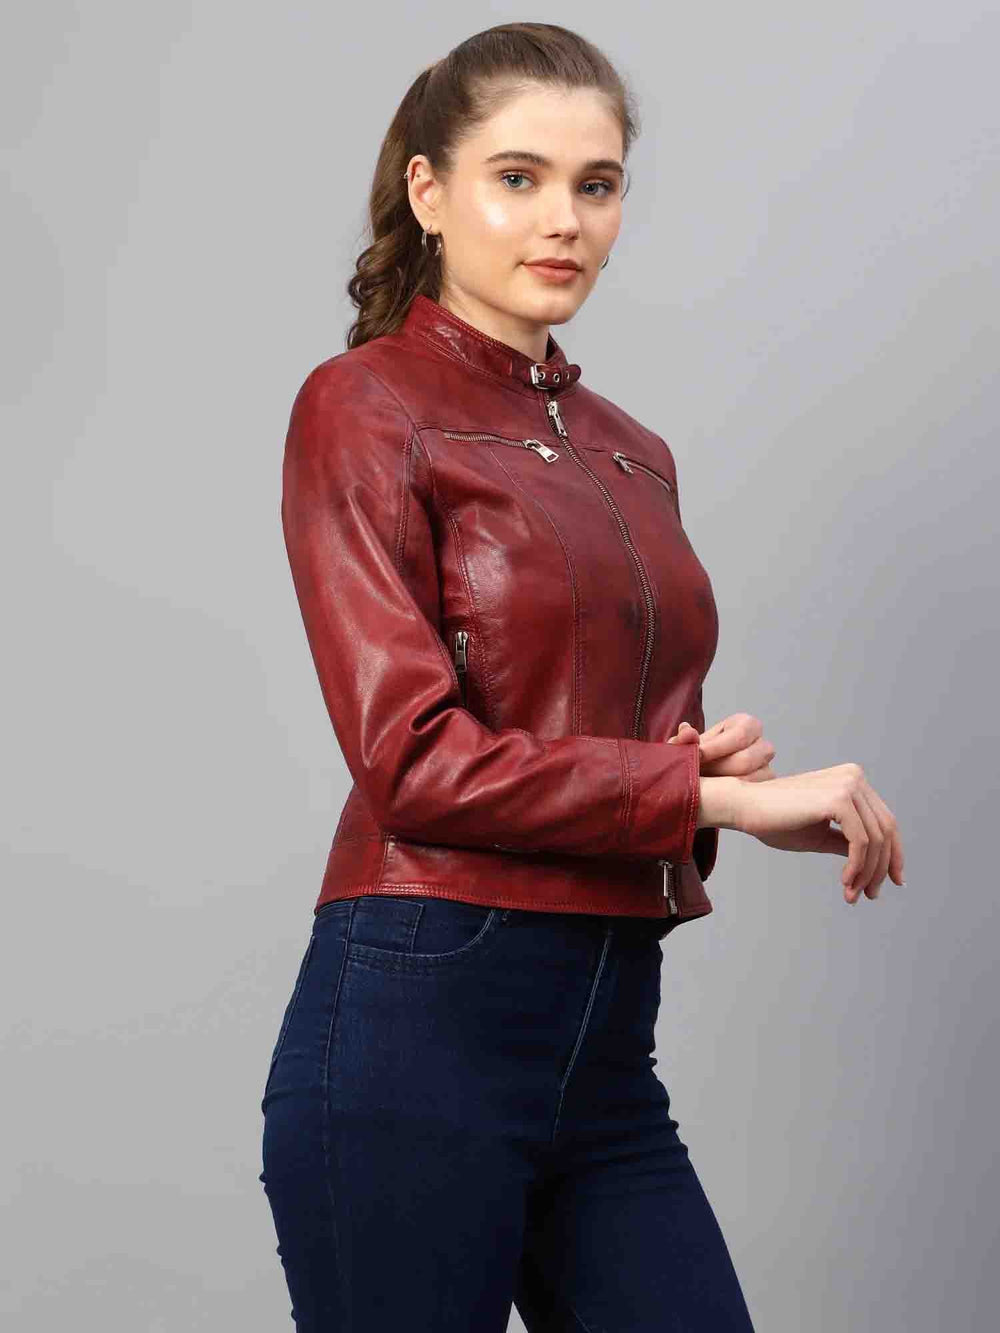 Saint Edwina Cafe Racer in Burgundy - Elevate your fashion game with this leather jacket for a chic look.